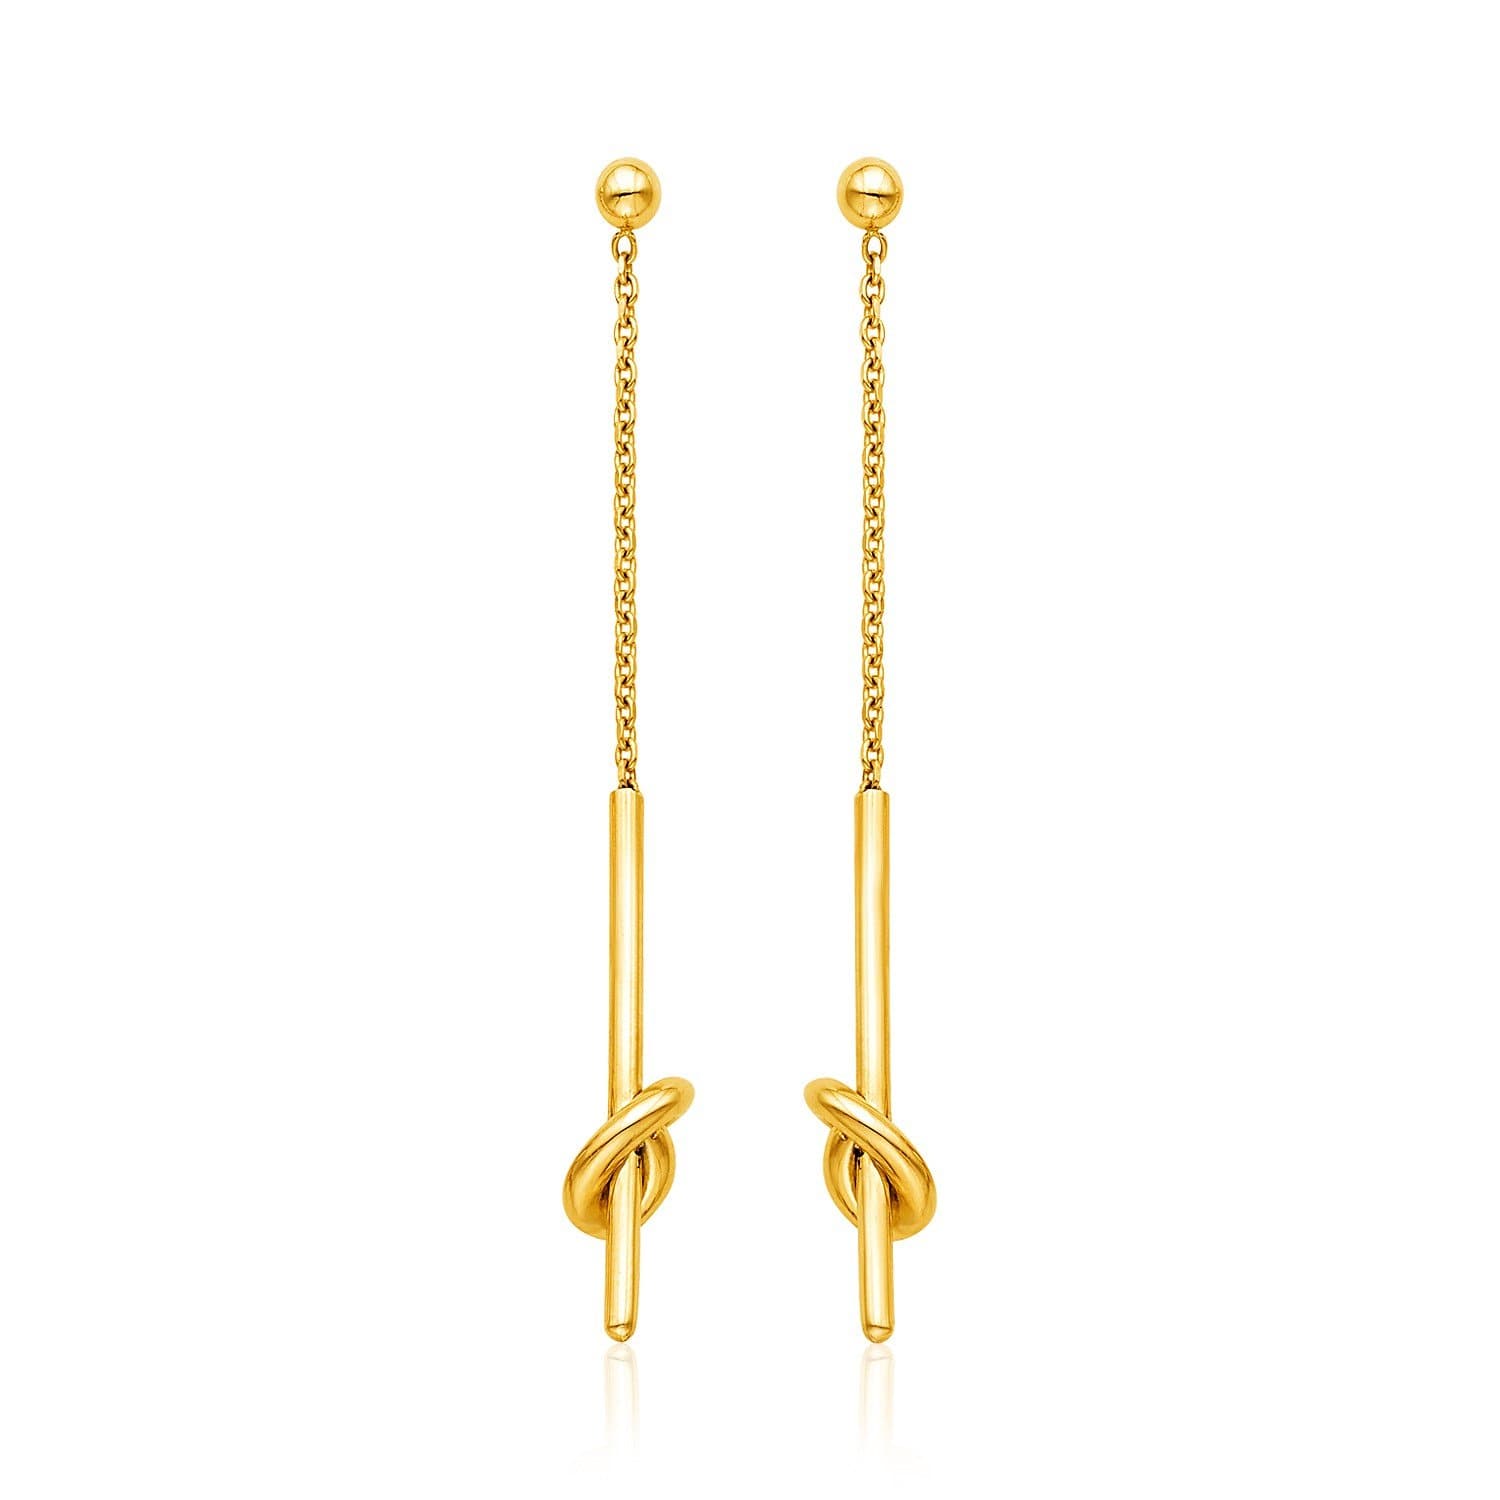 14k Yellow Gold Dangle Earrings with Knots